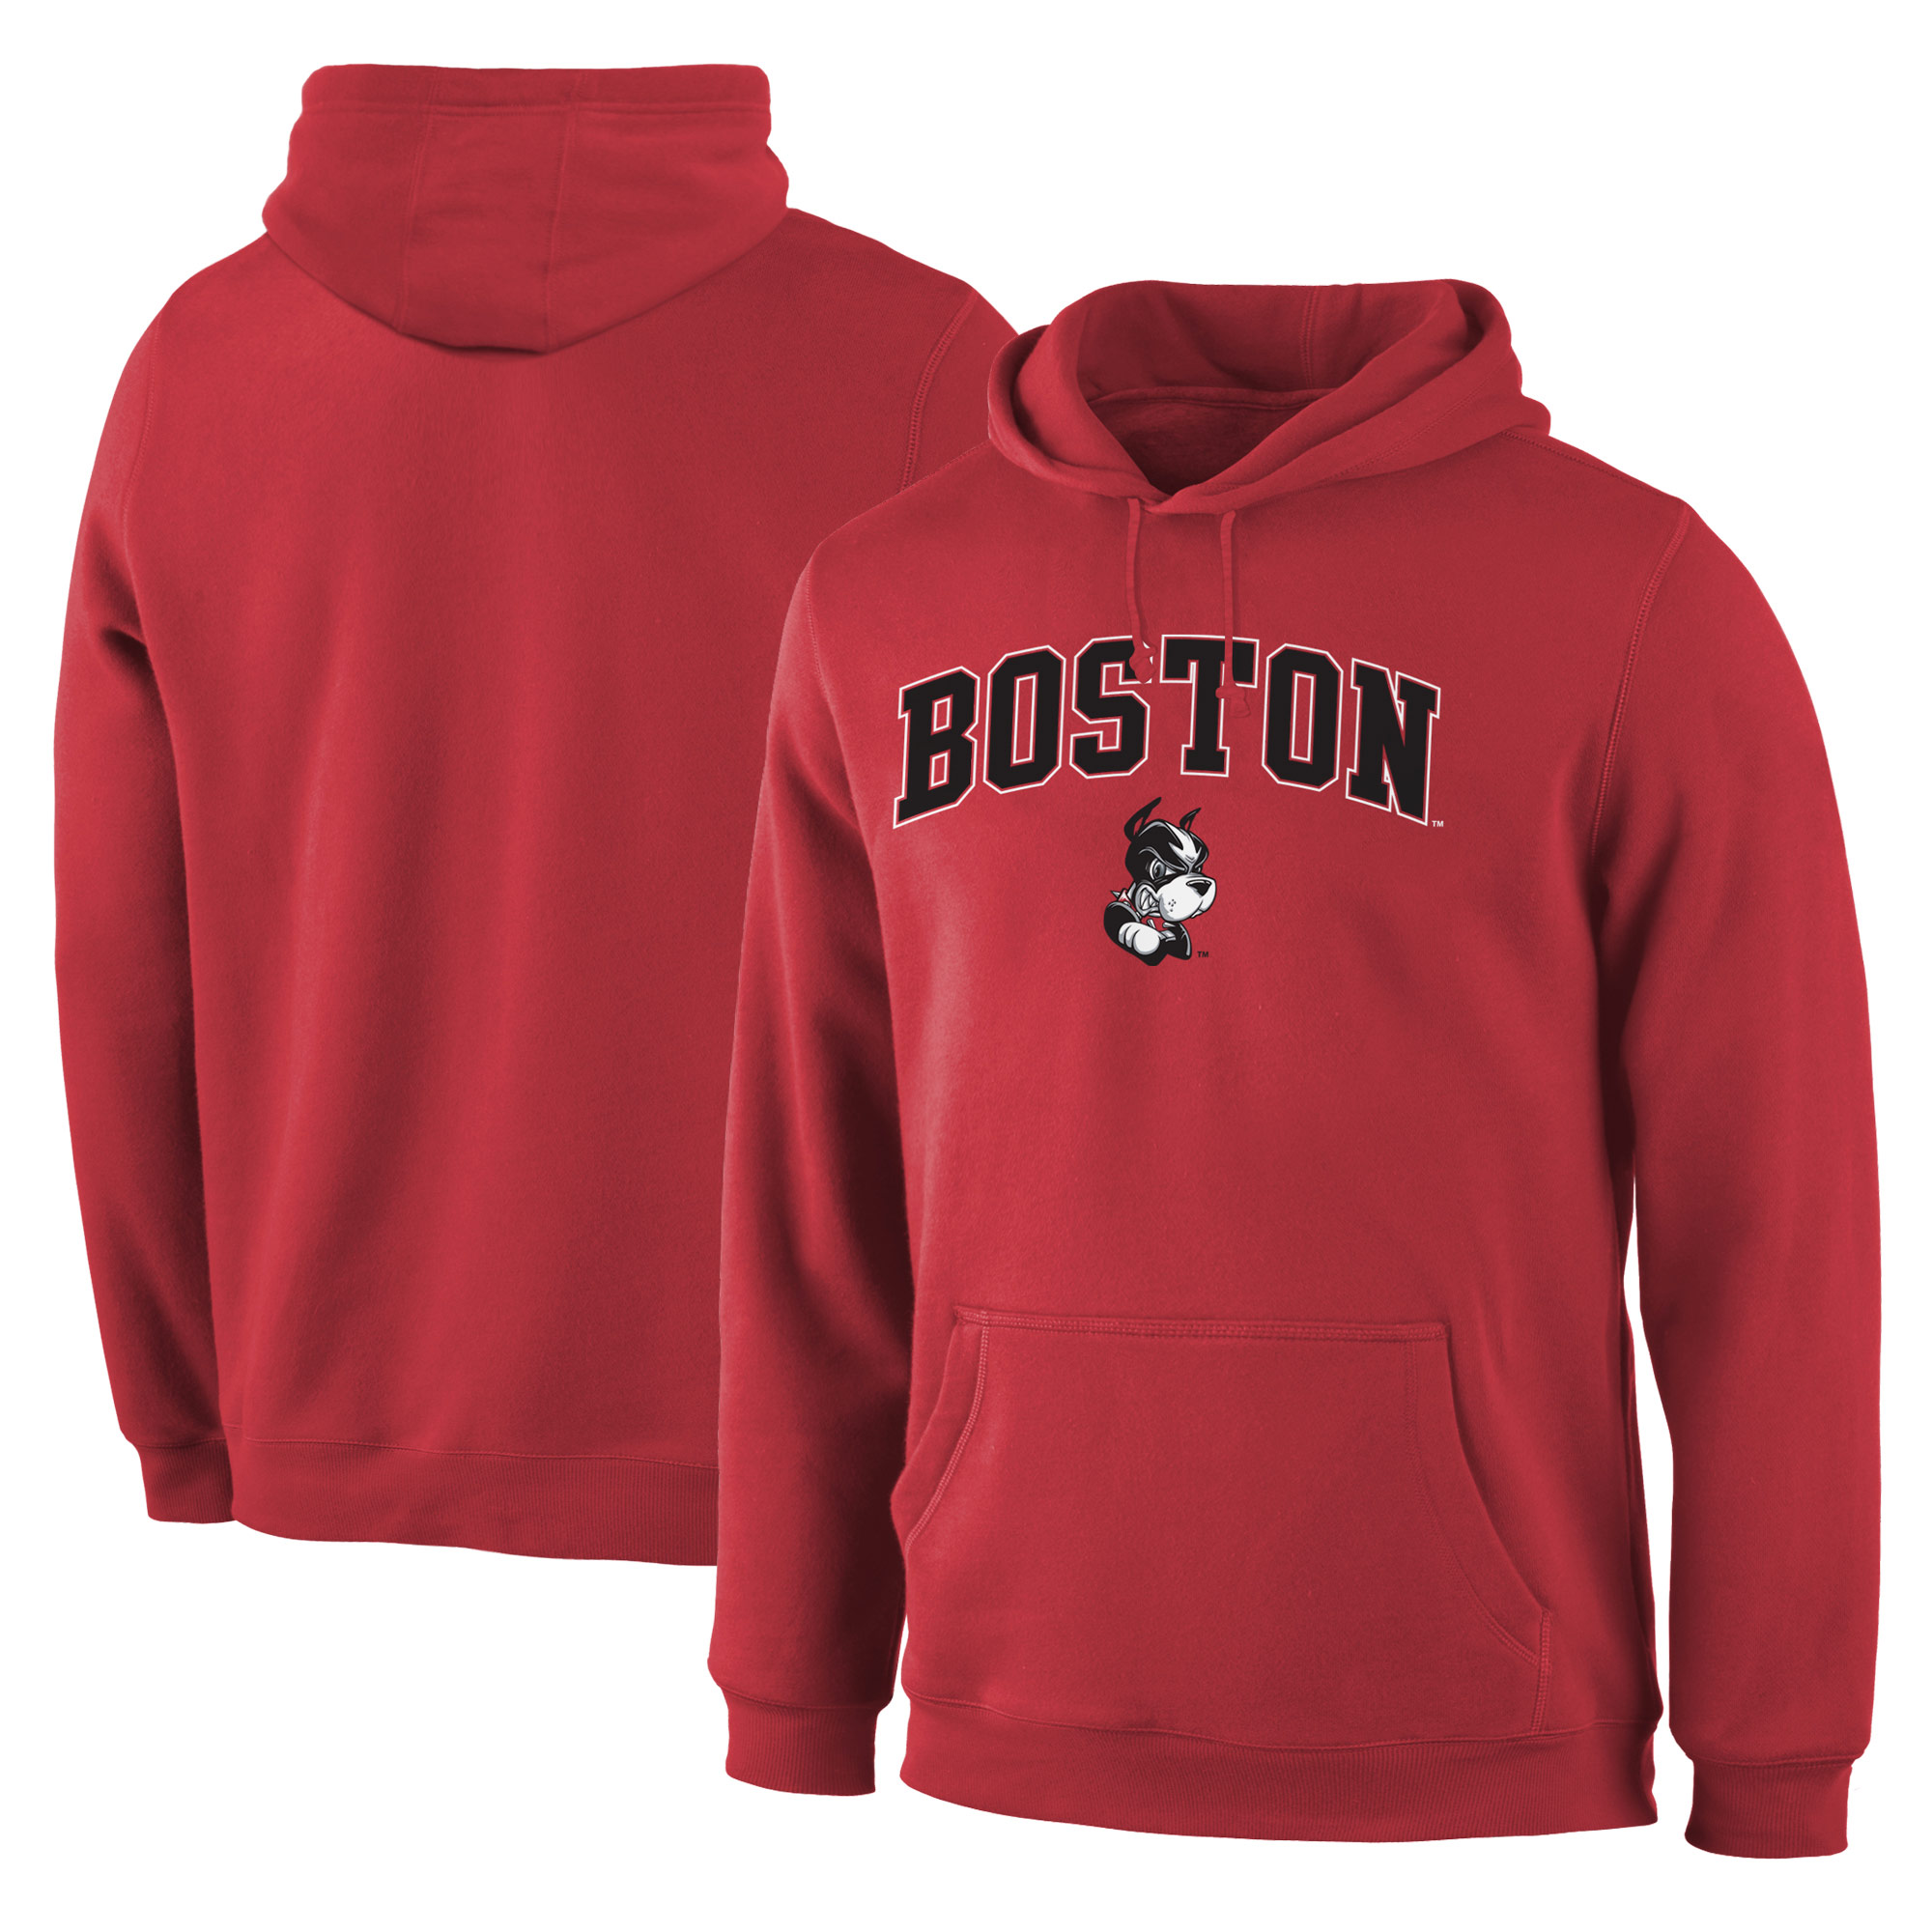 Boston University Red Campus Pullover Hoodie - Click Image to Close